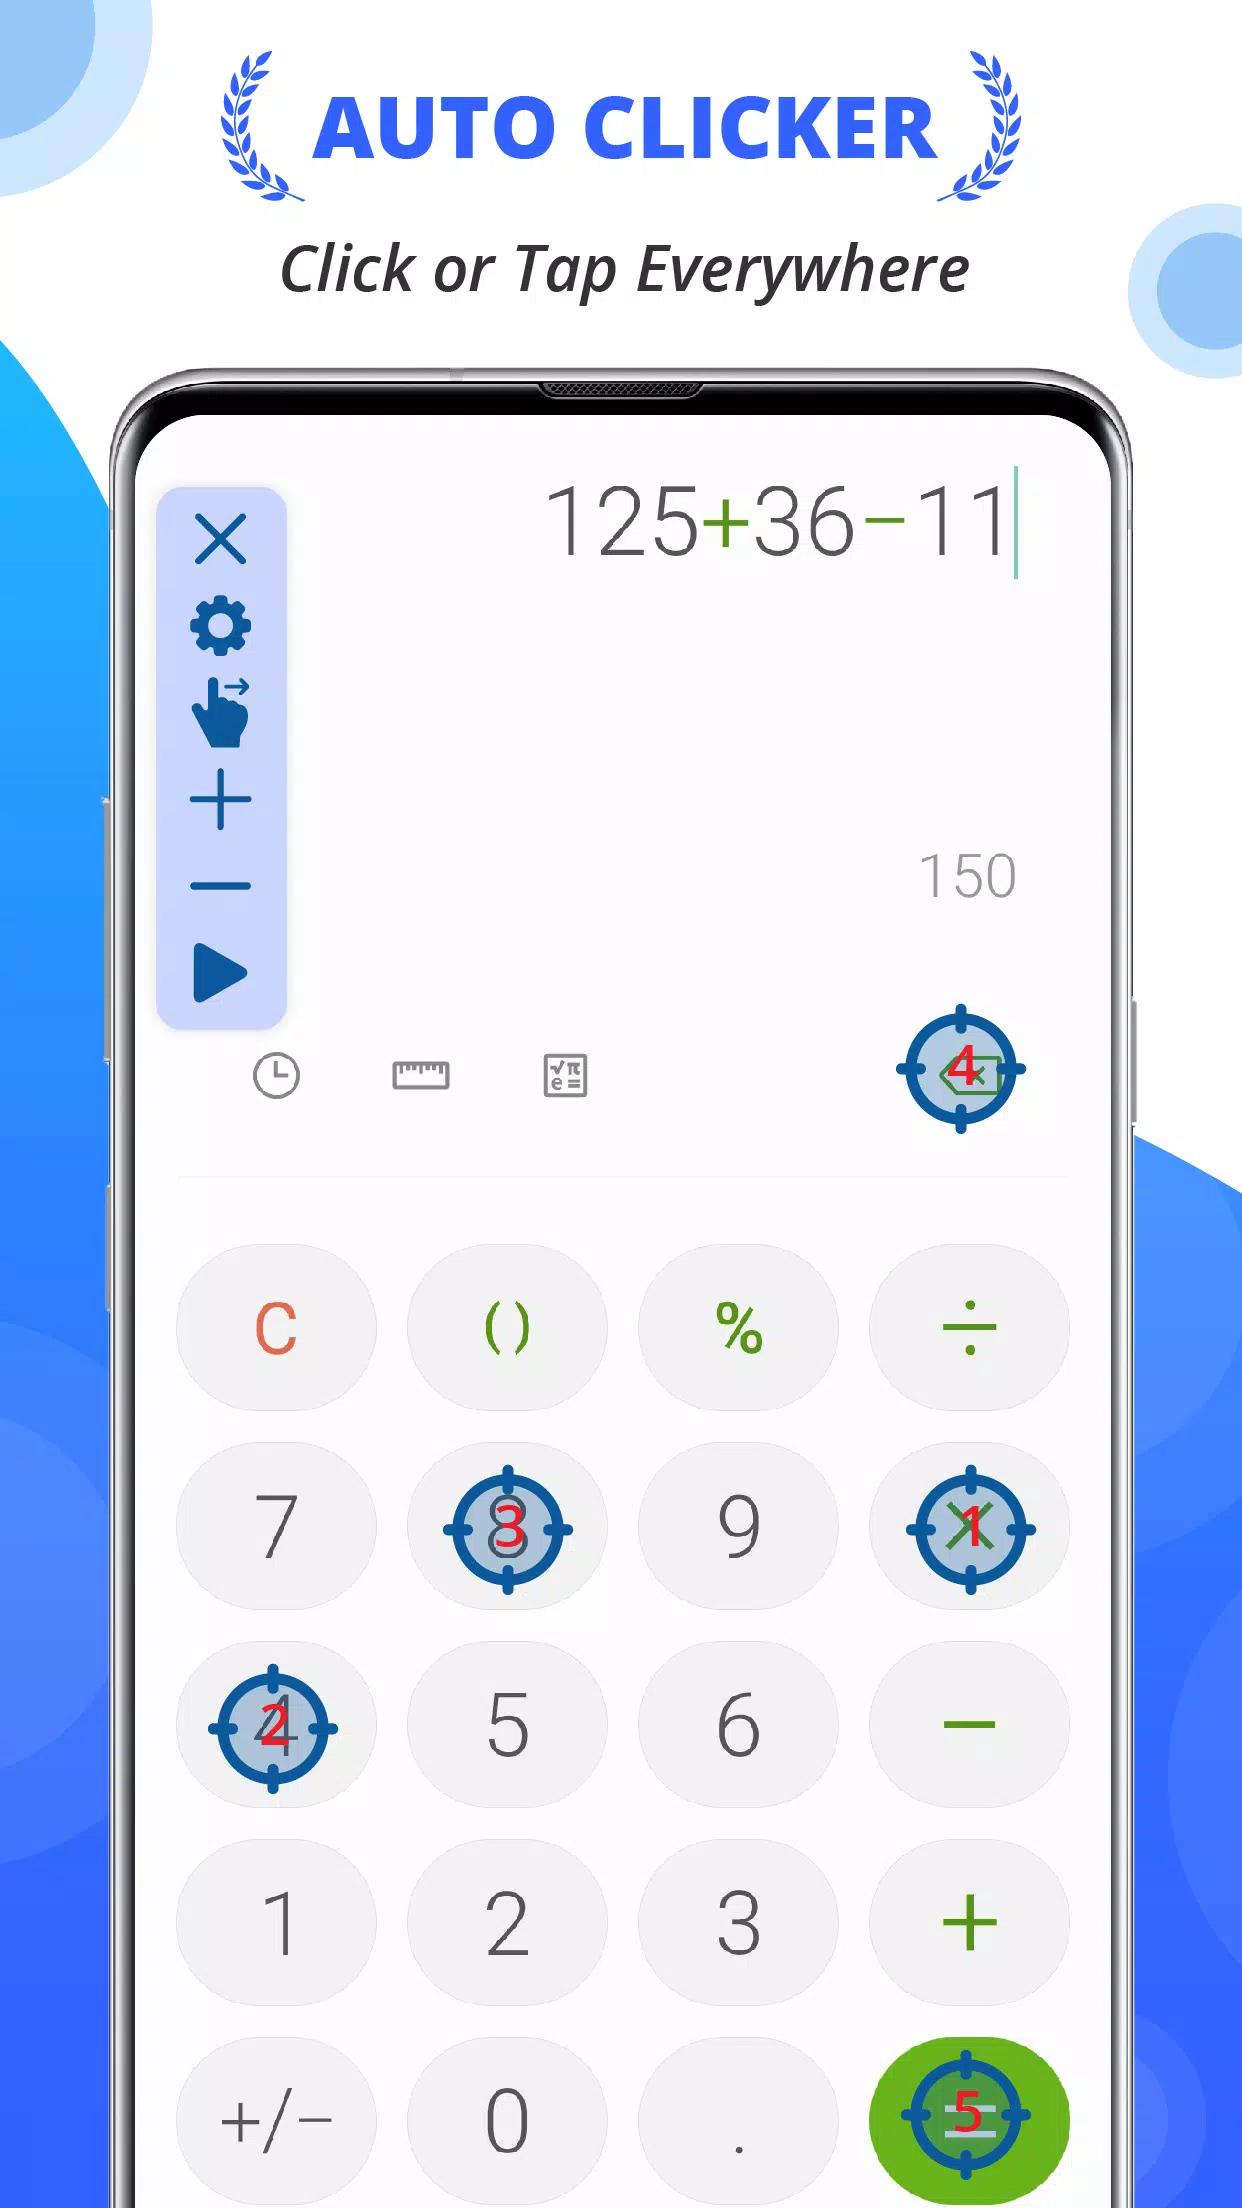 HOW TO GET AN AUTO CLICKER FOR MOBILE IN (ROBLOX 2021) 